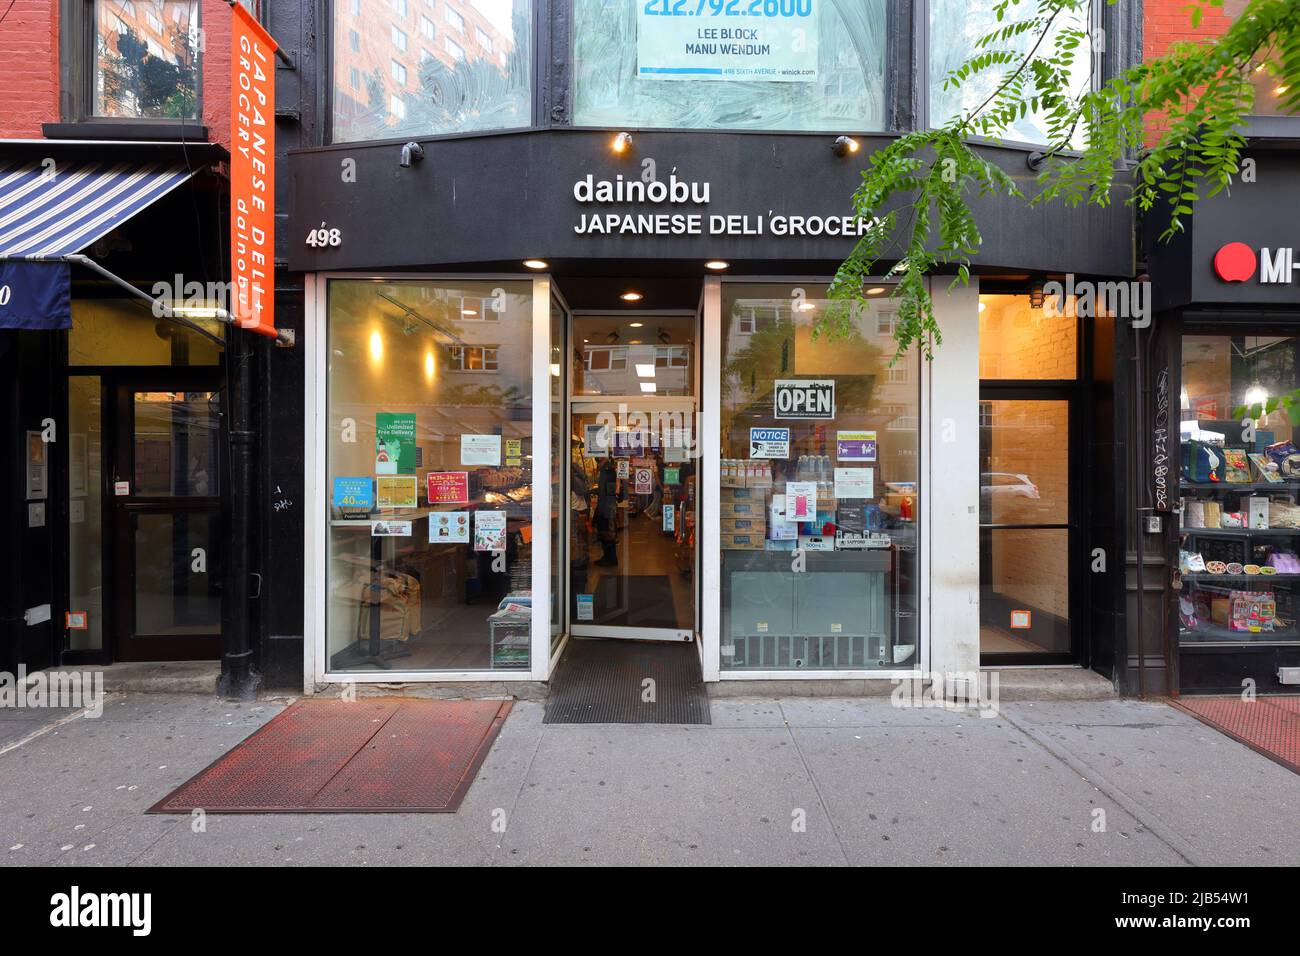 Dainobu, 498 6th Ave, New York, NYC storefront photo of a Japanese grocery store in the Greenwich Village neighborhood. Stock Photo